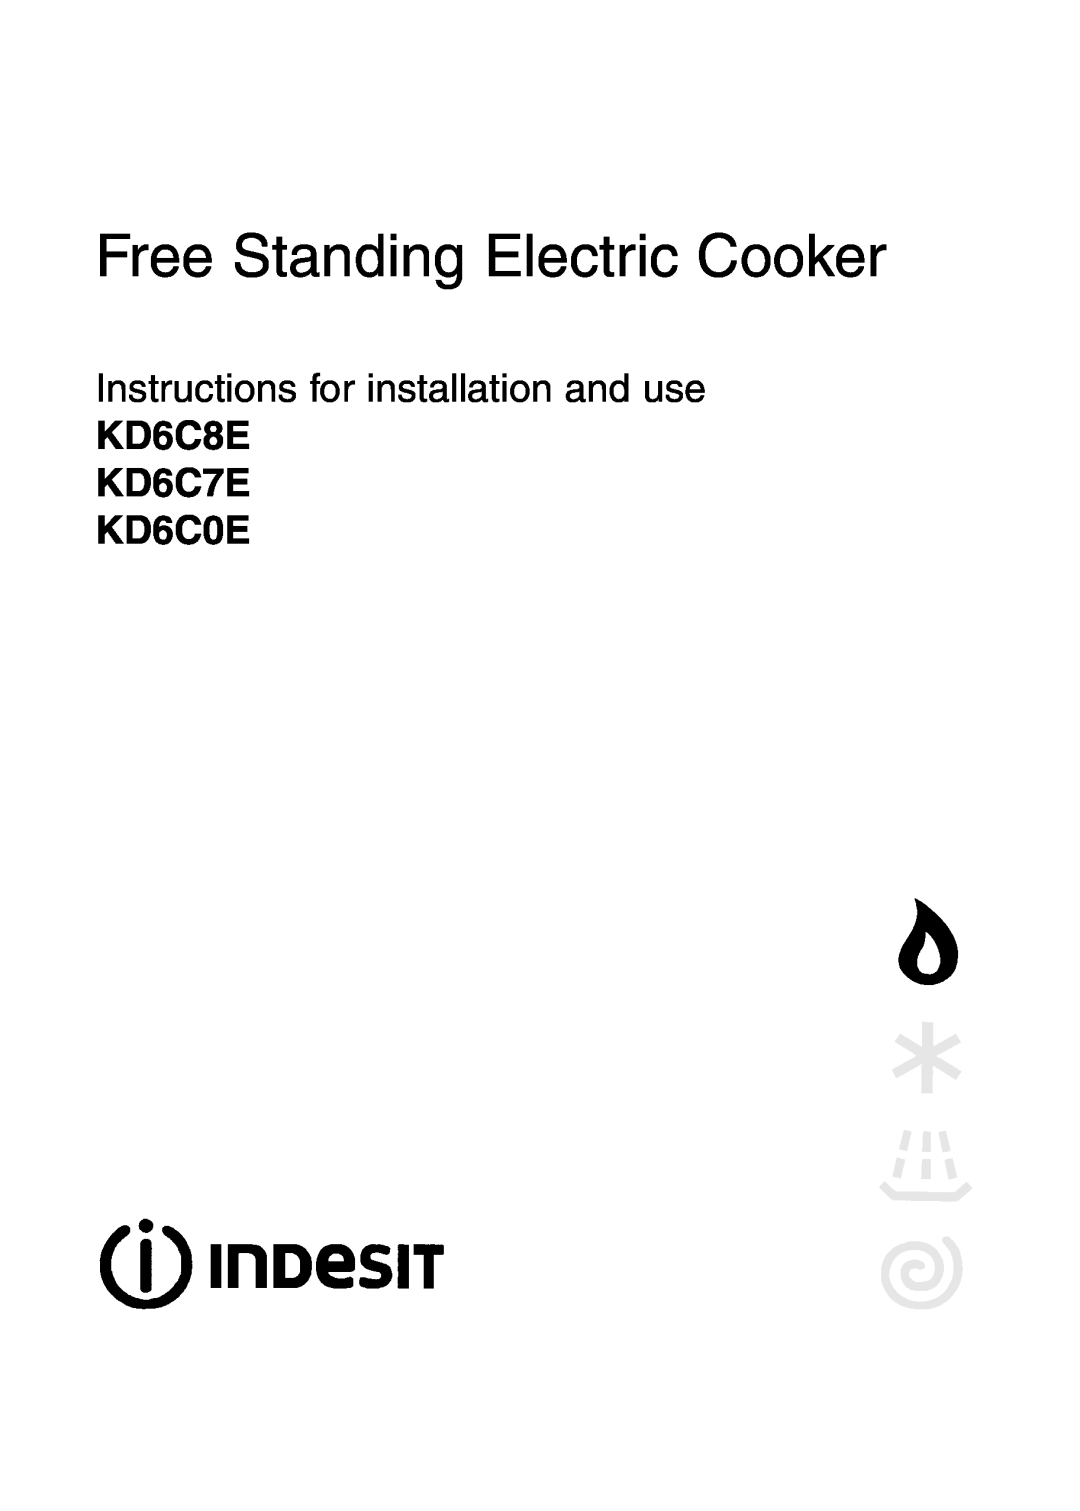 Indesit manual Free Standing Electric Cooker, Instructions for installation and use, KD6C8E KD6C7E KD6C0E 